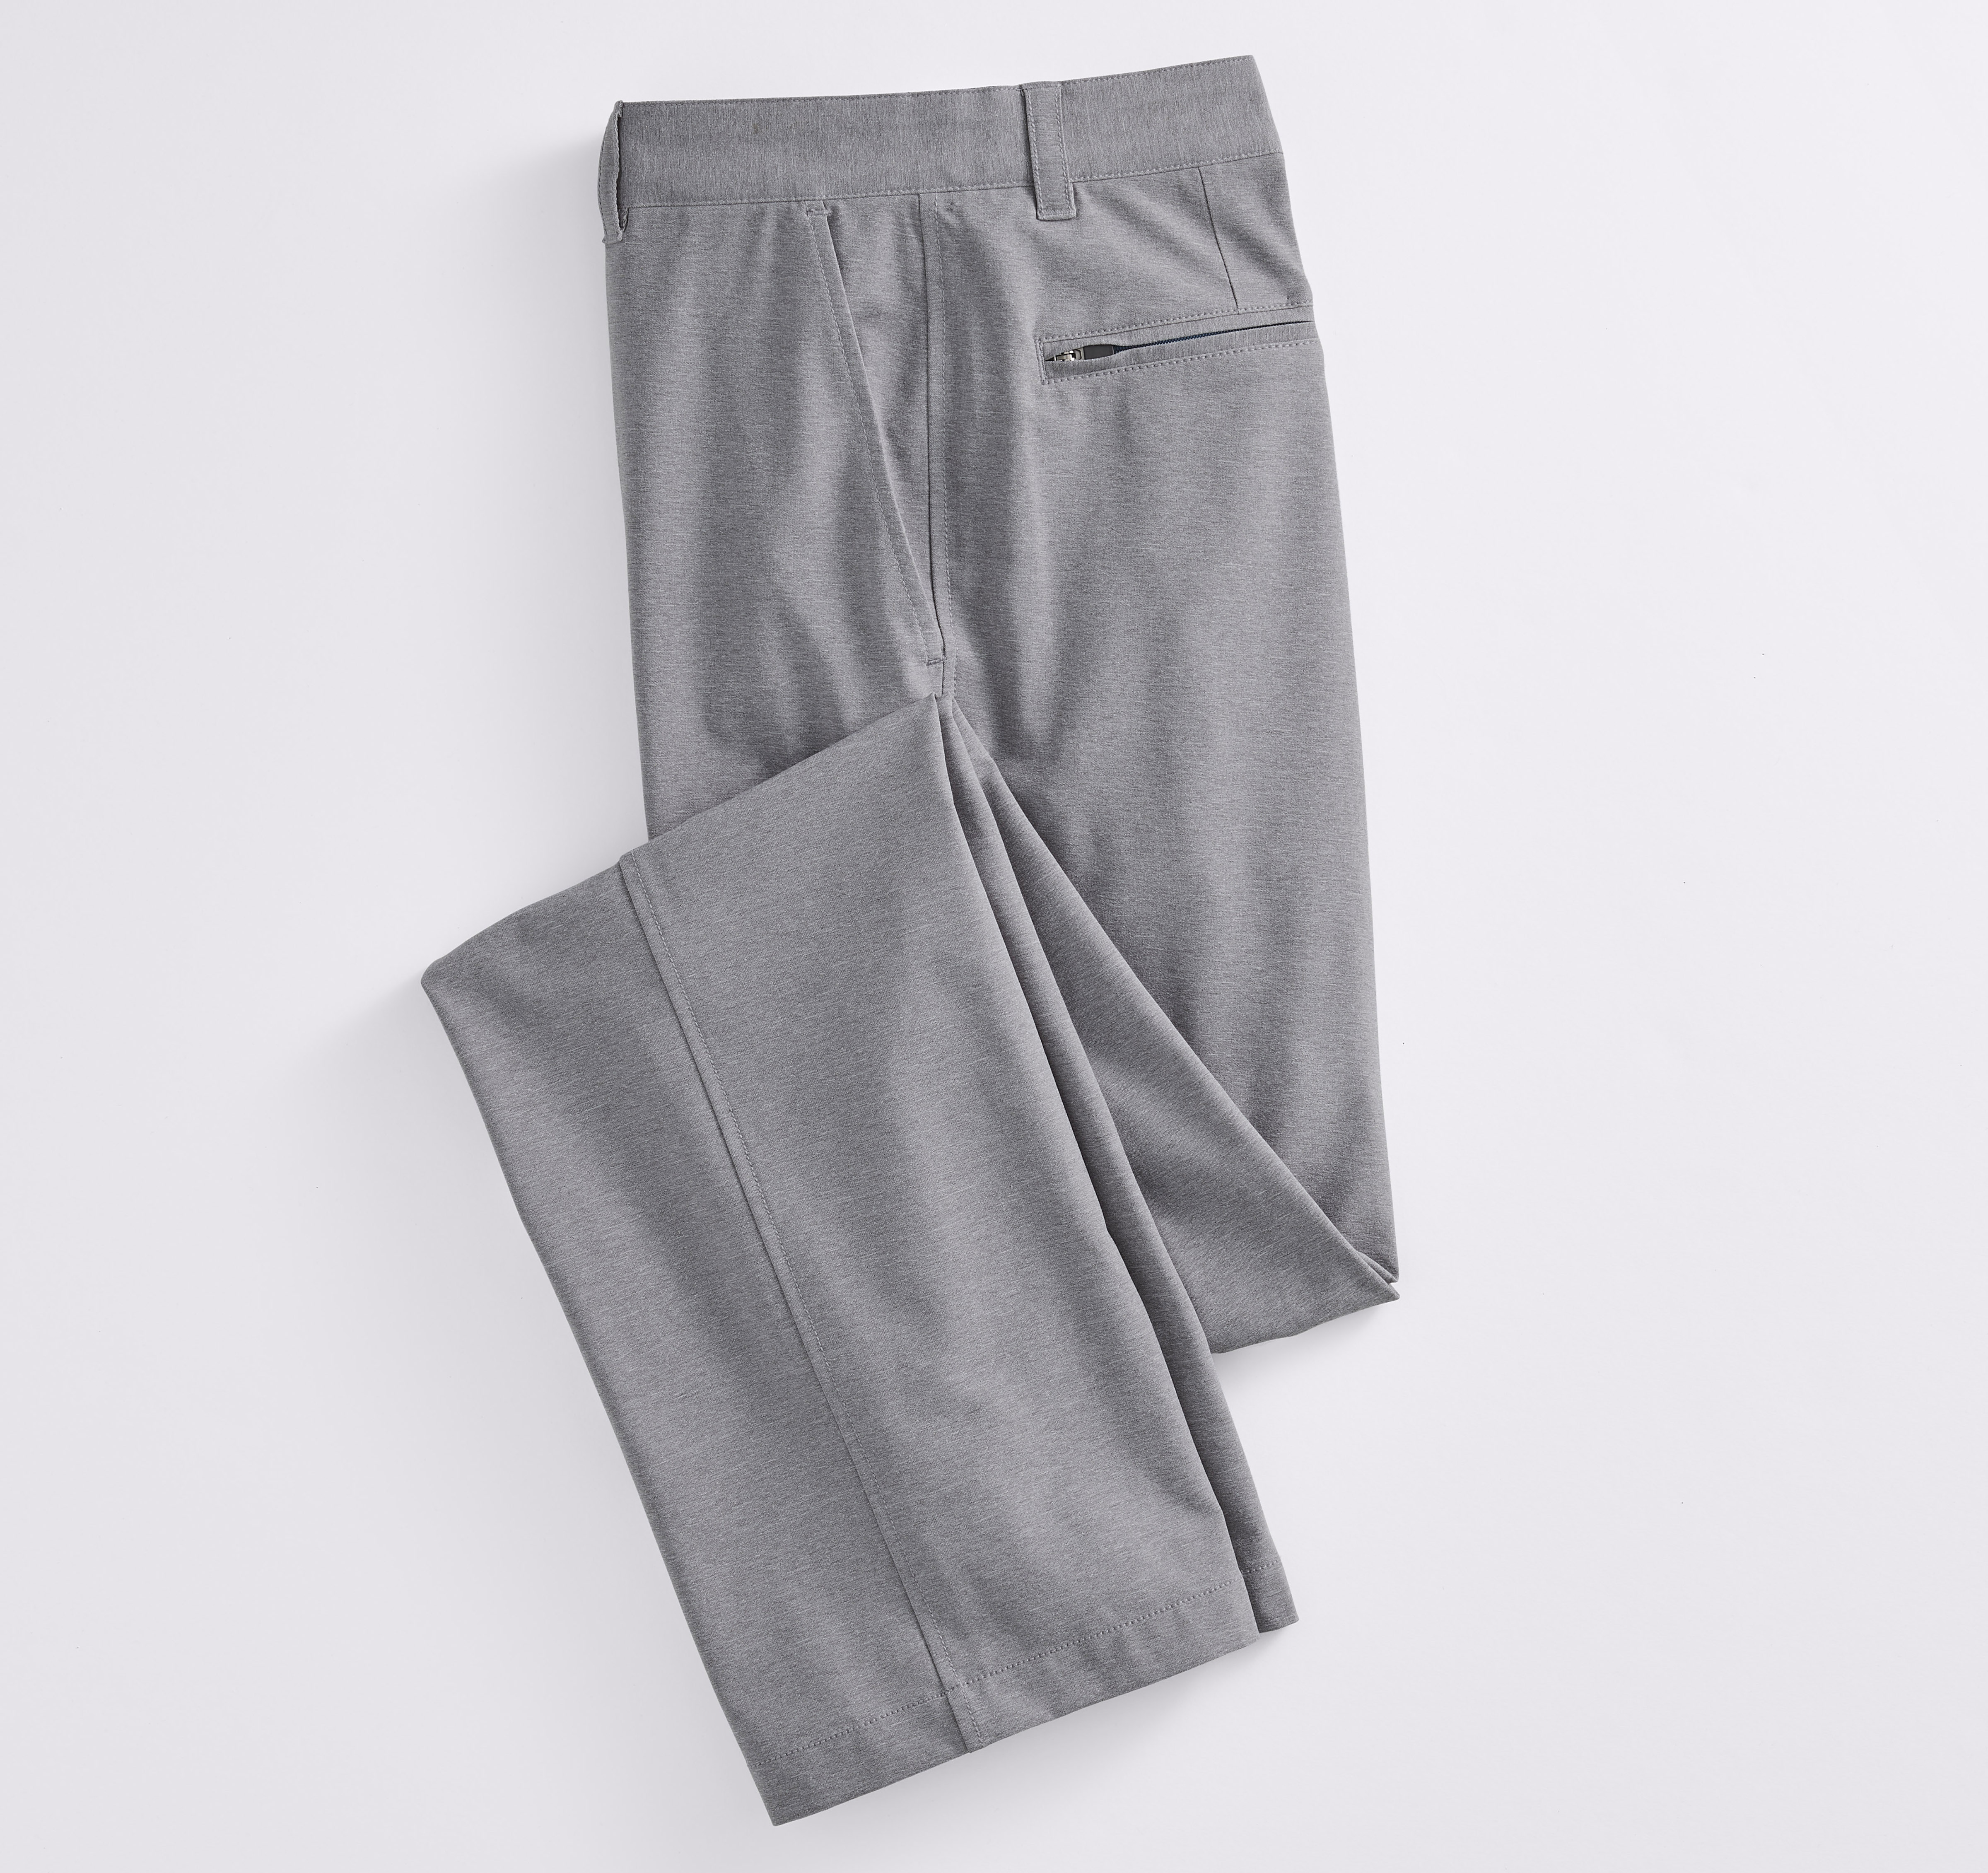 XC4® Performance Pants image number null